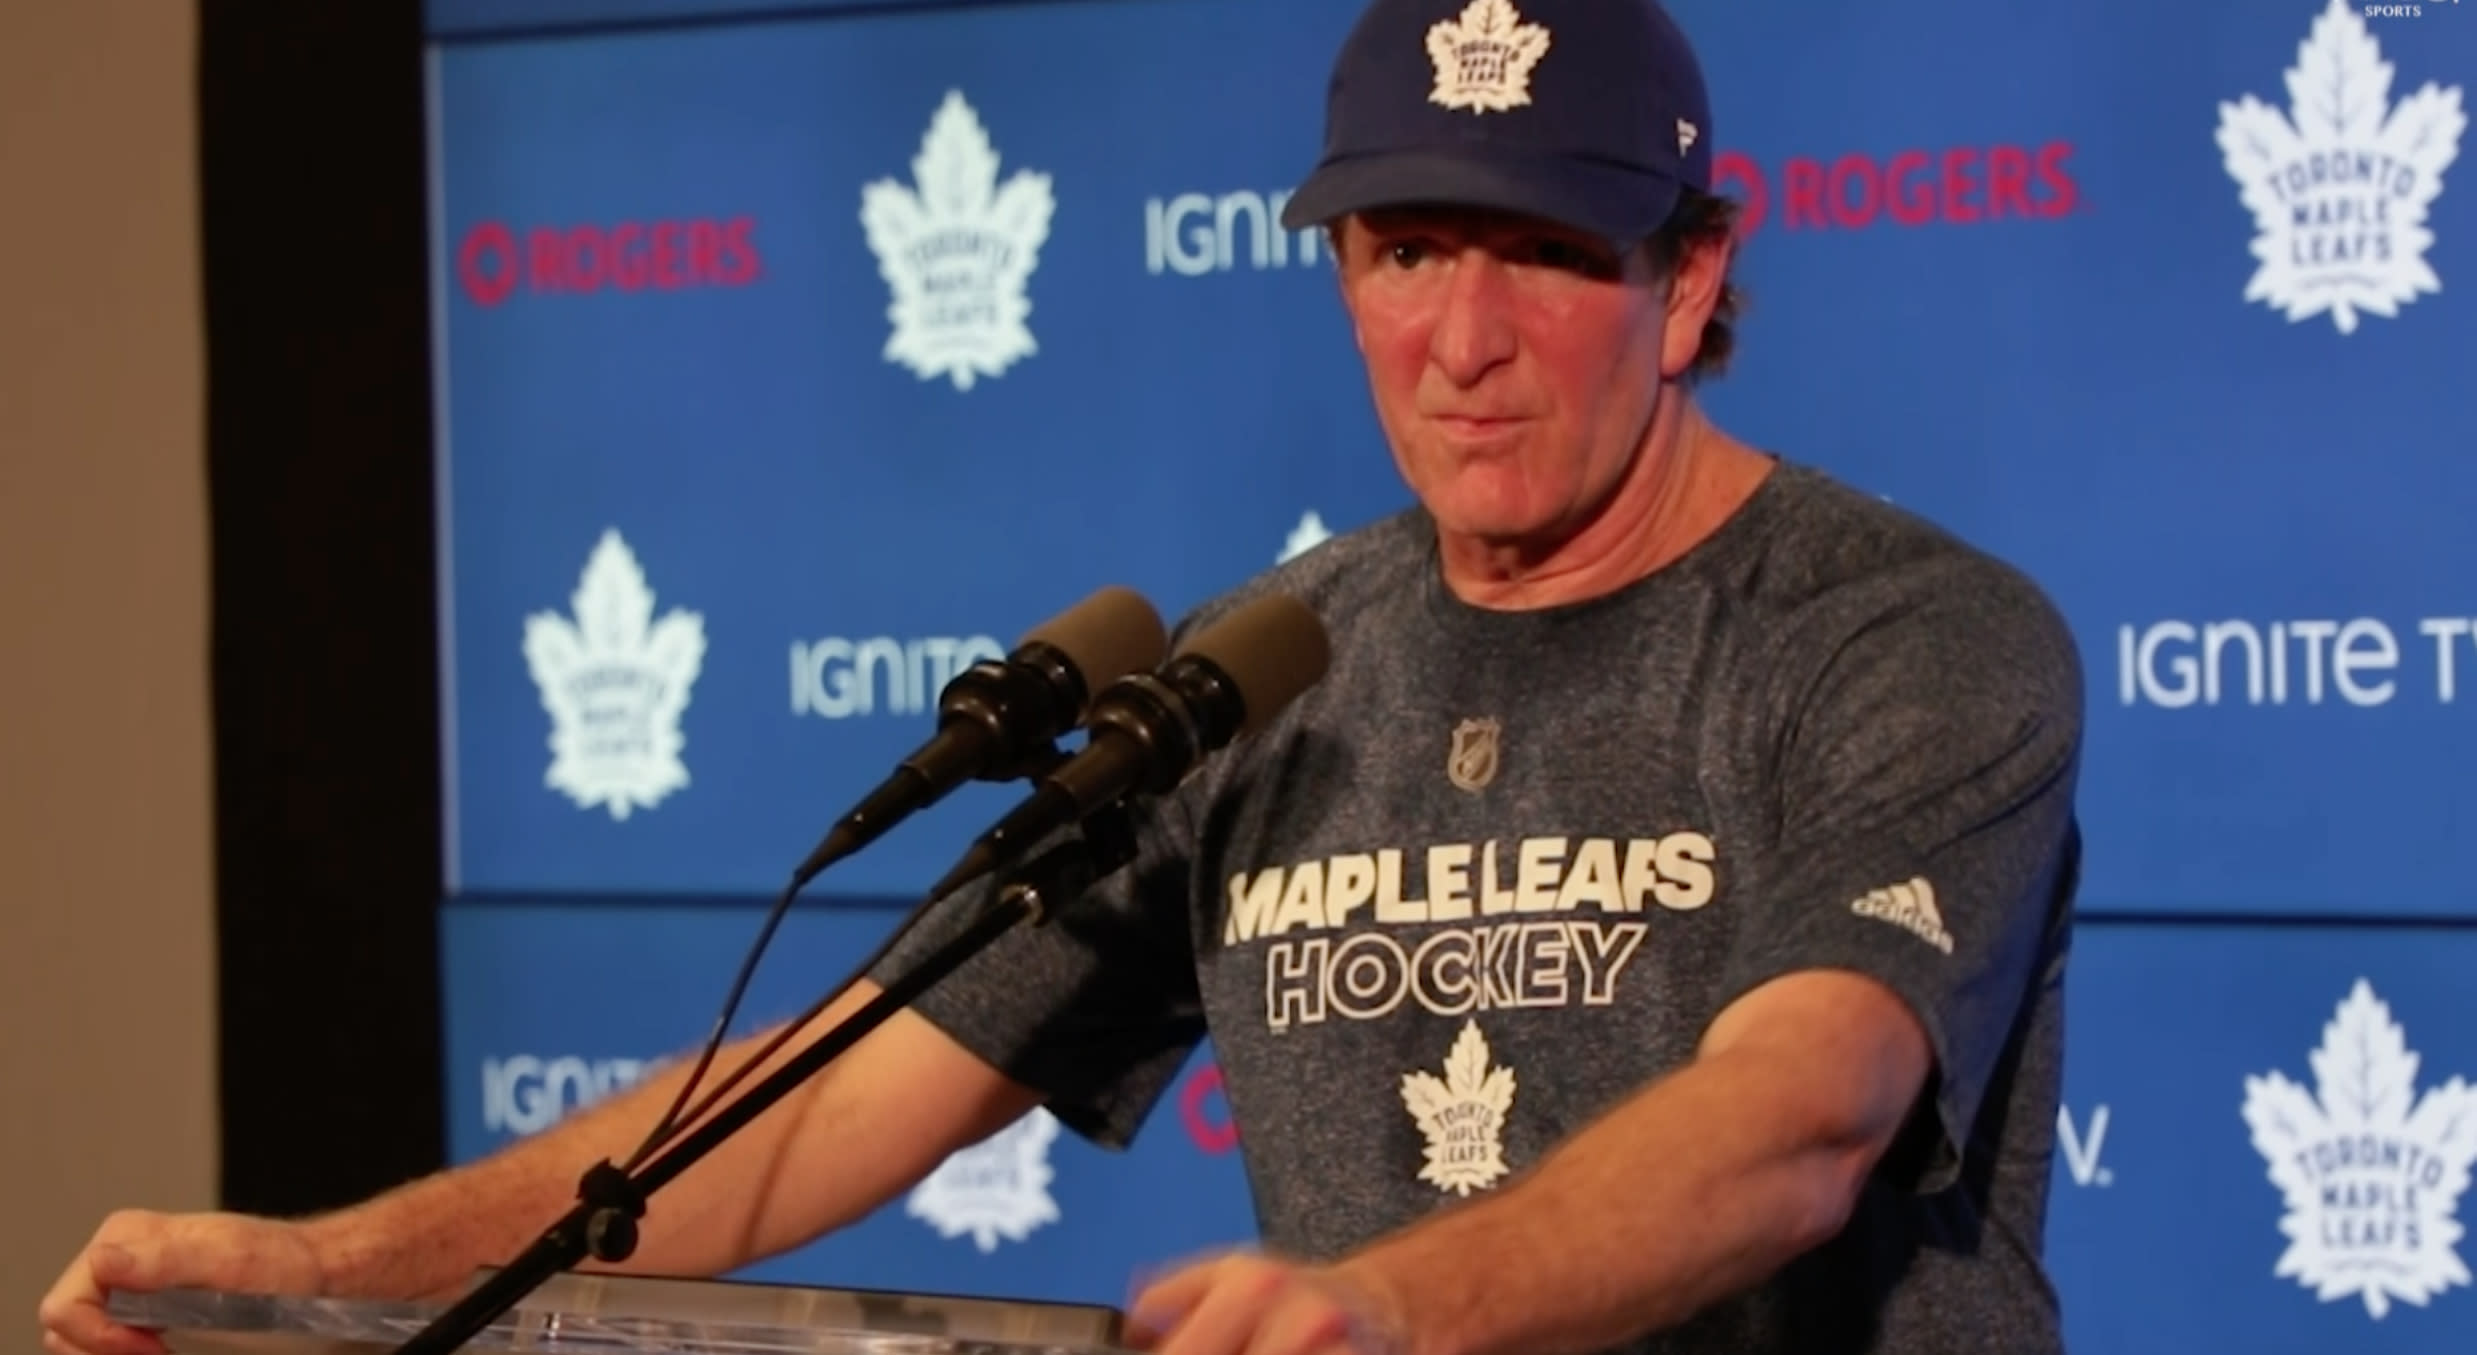 I don't trust any of these Uber drivers,' says former NHLer Anson